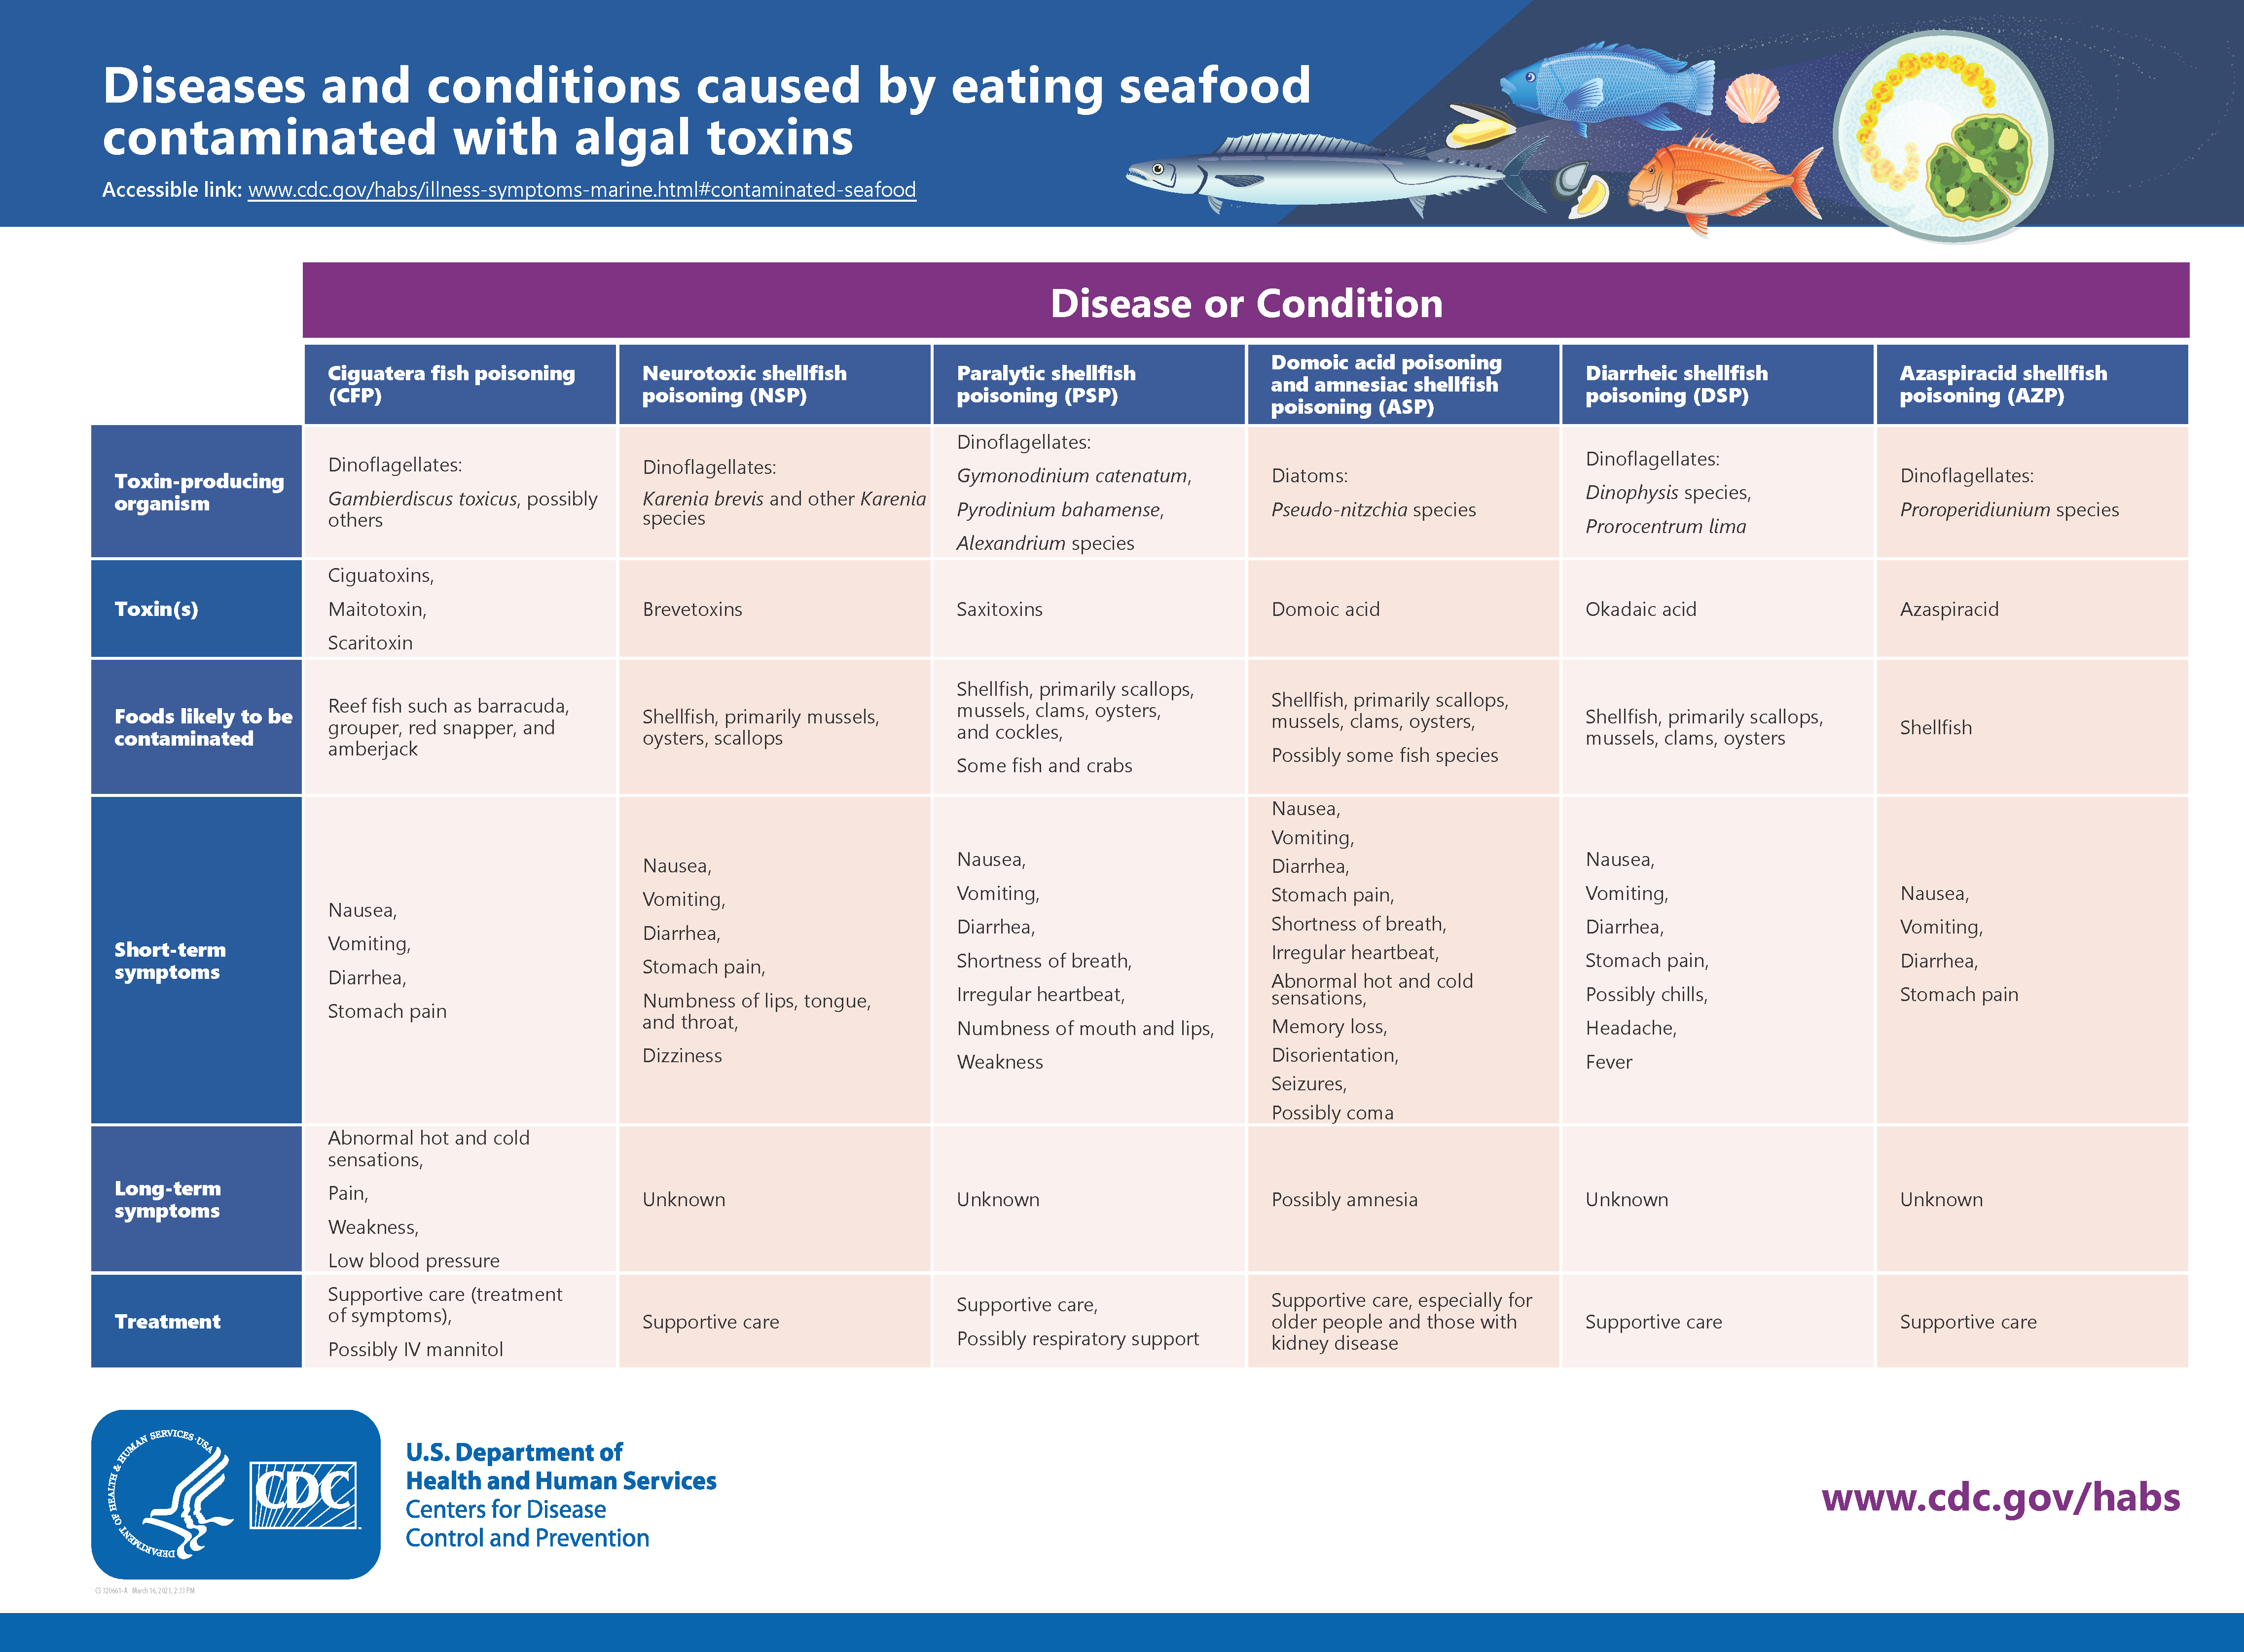 Diseases and conditions caused by eating seafood contaminated with algal toxins